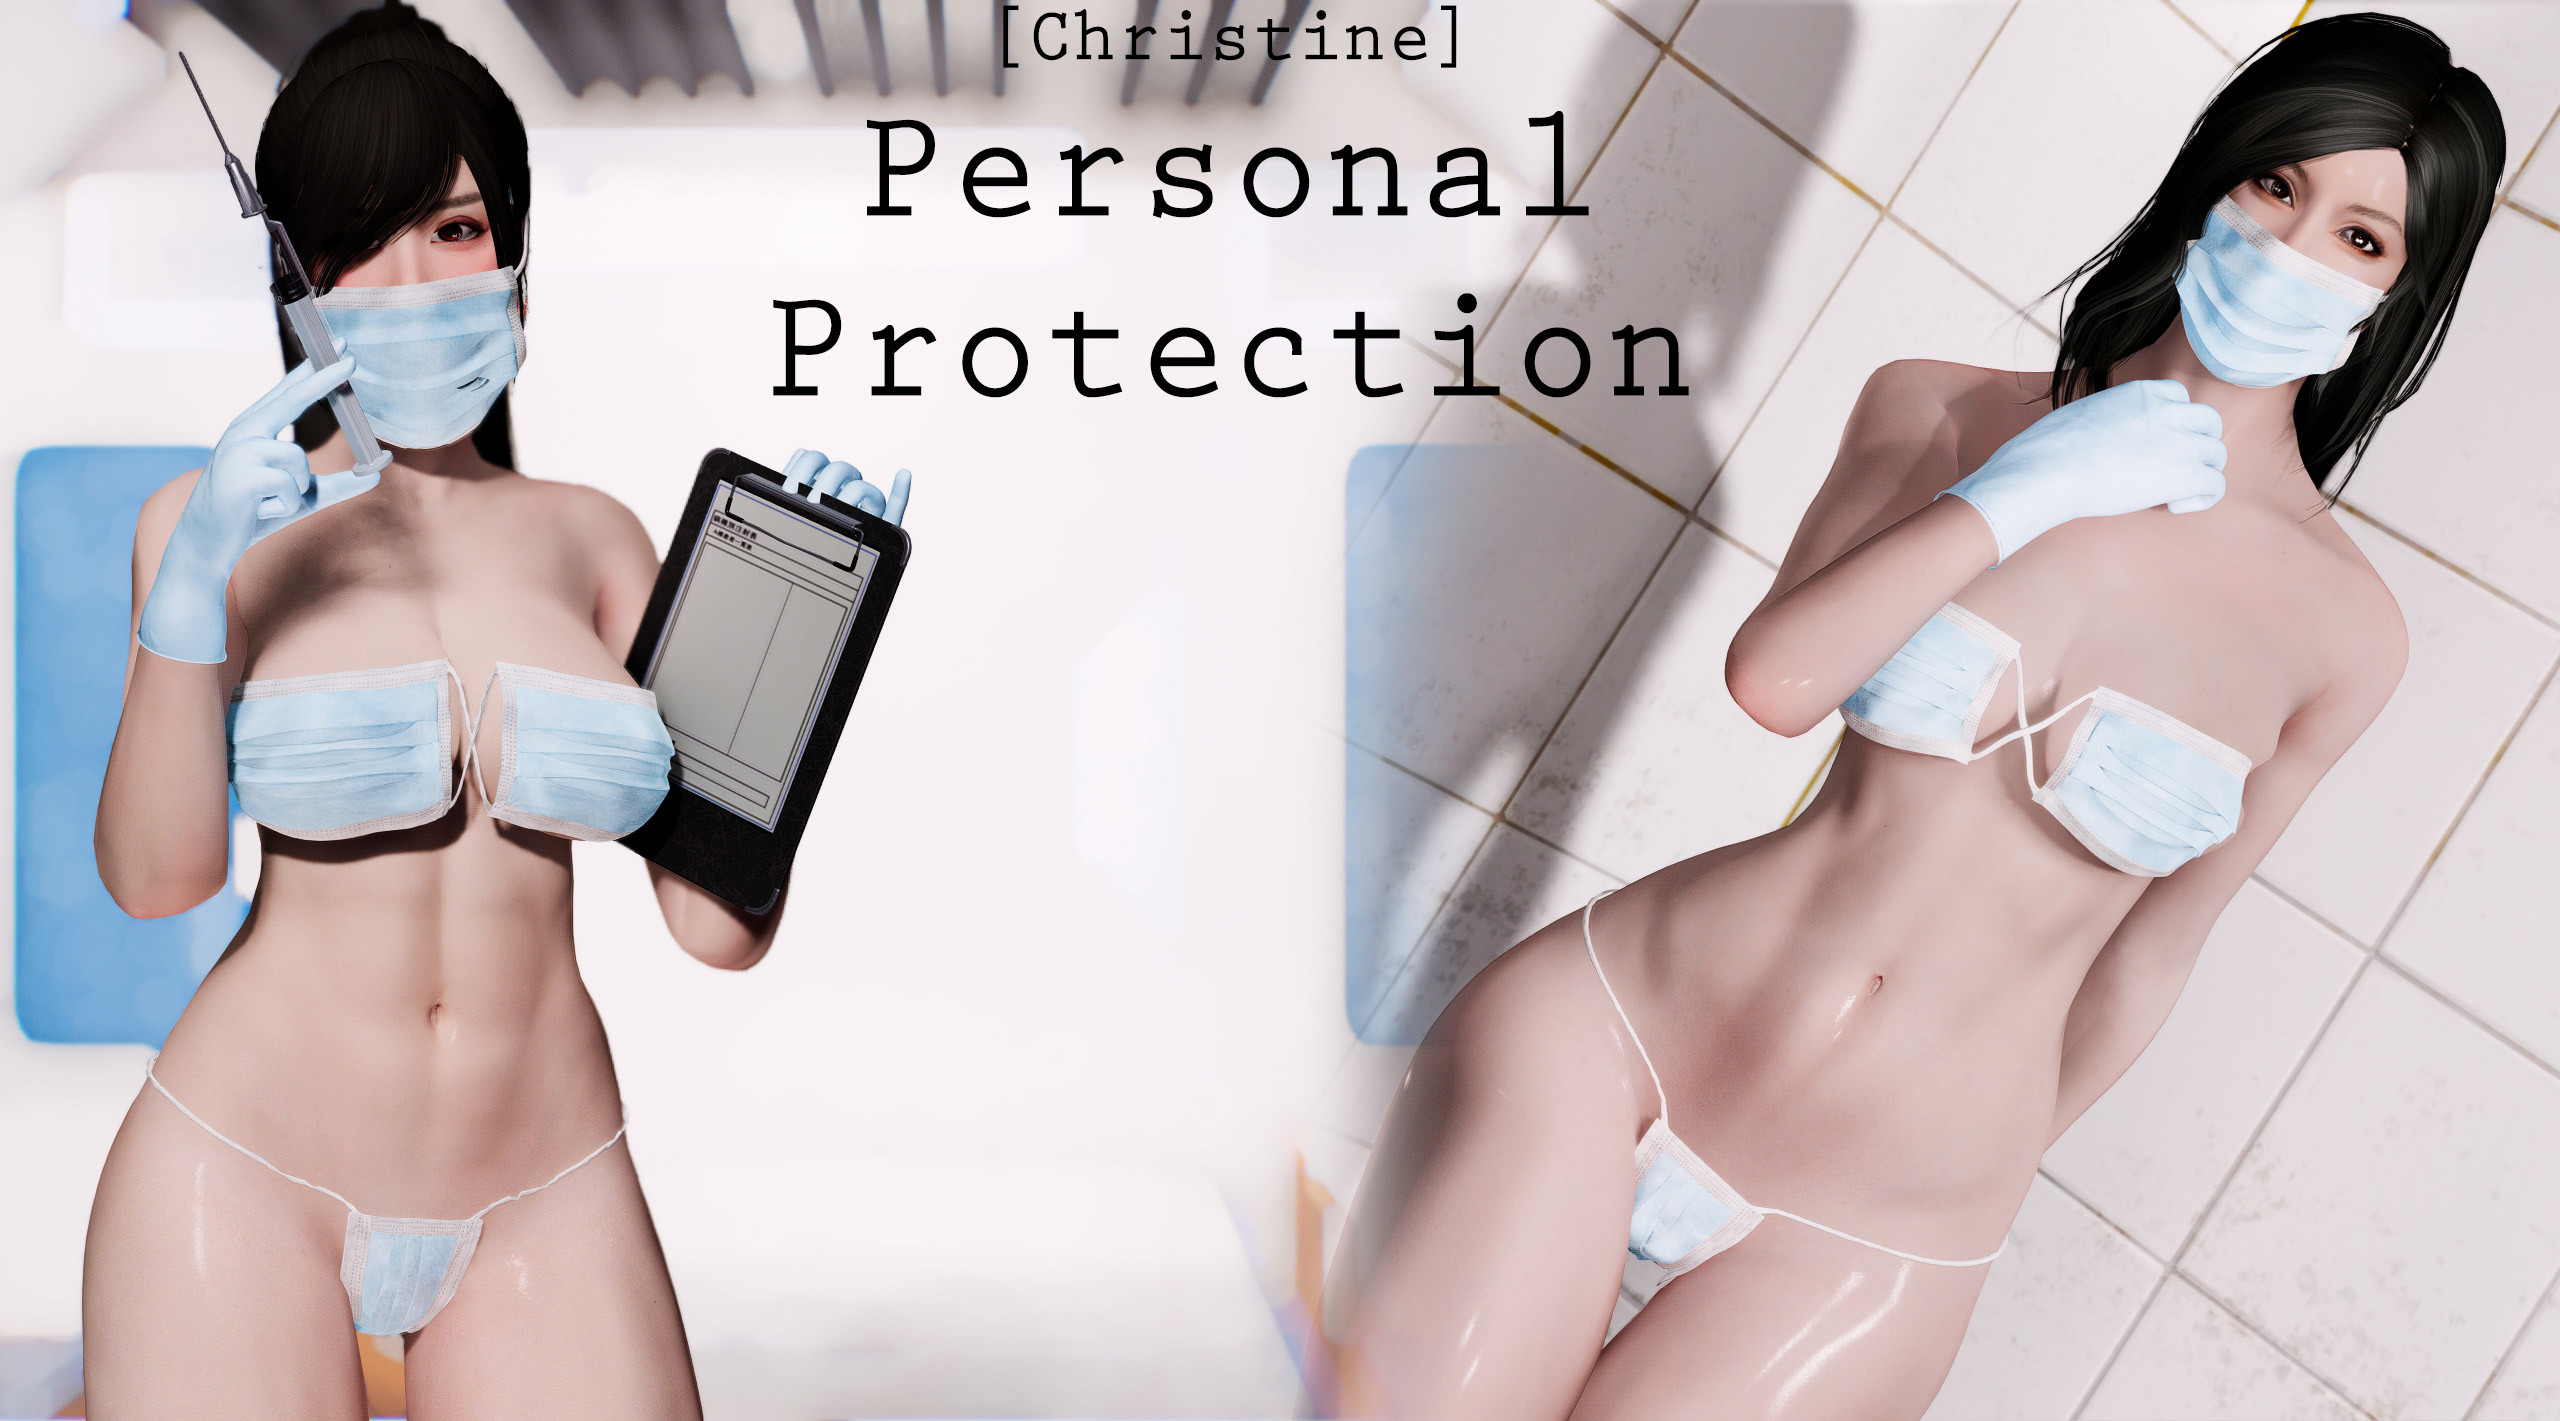 [Christine] Personal Protection